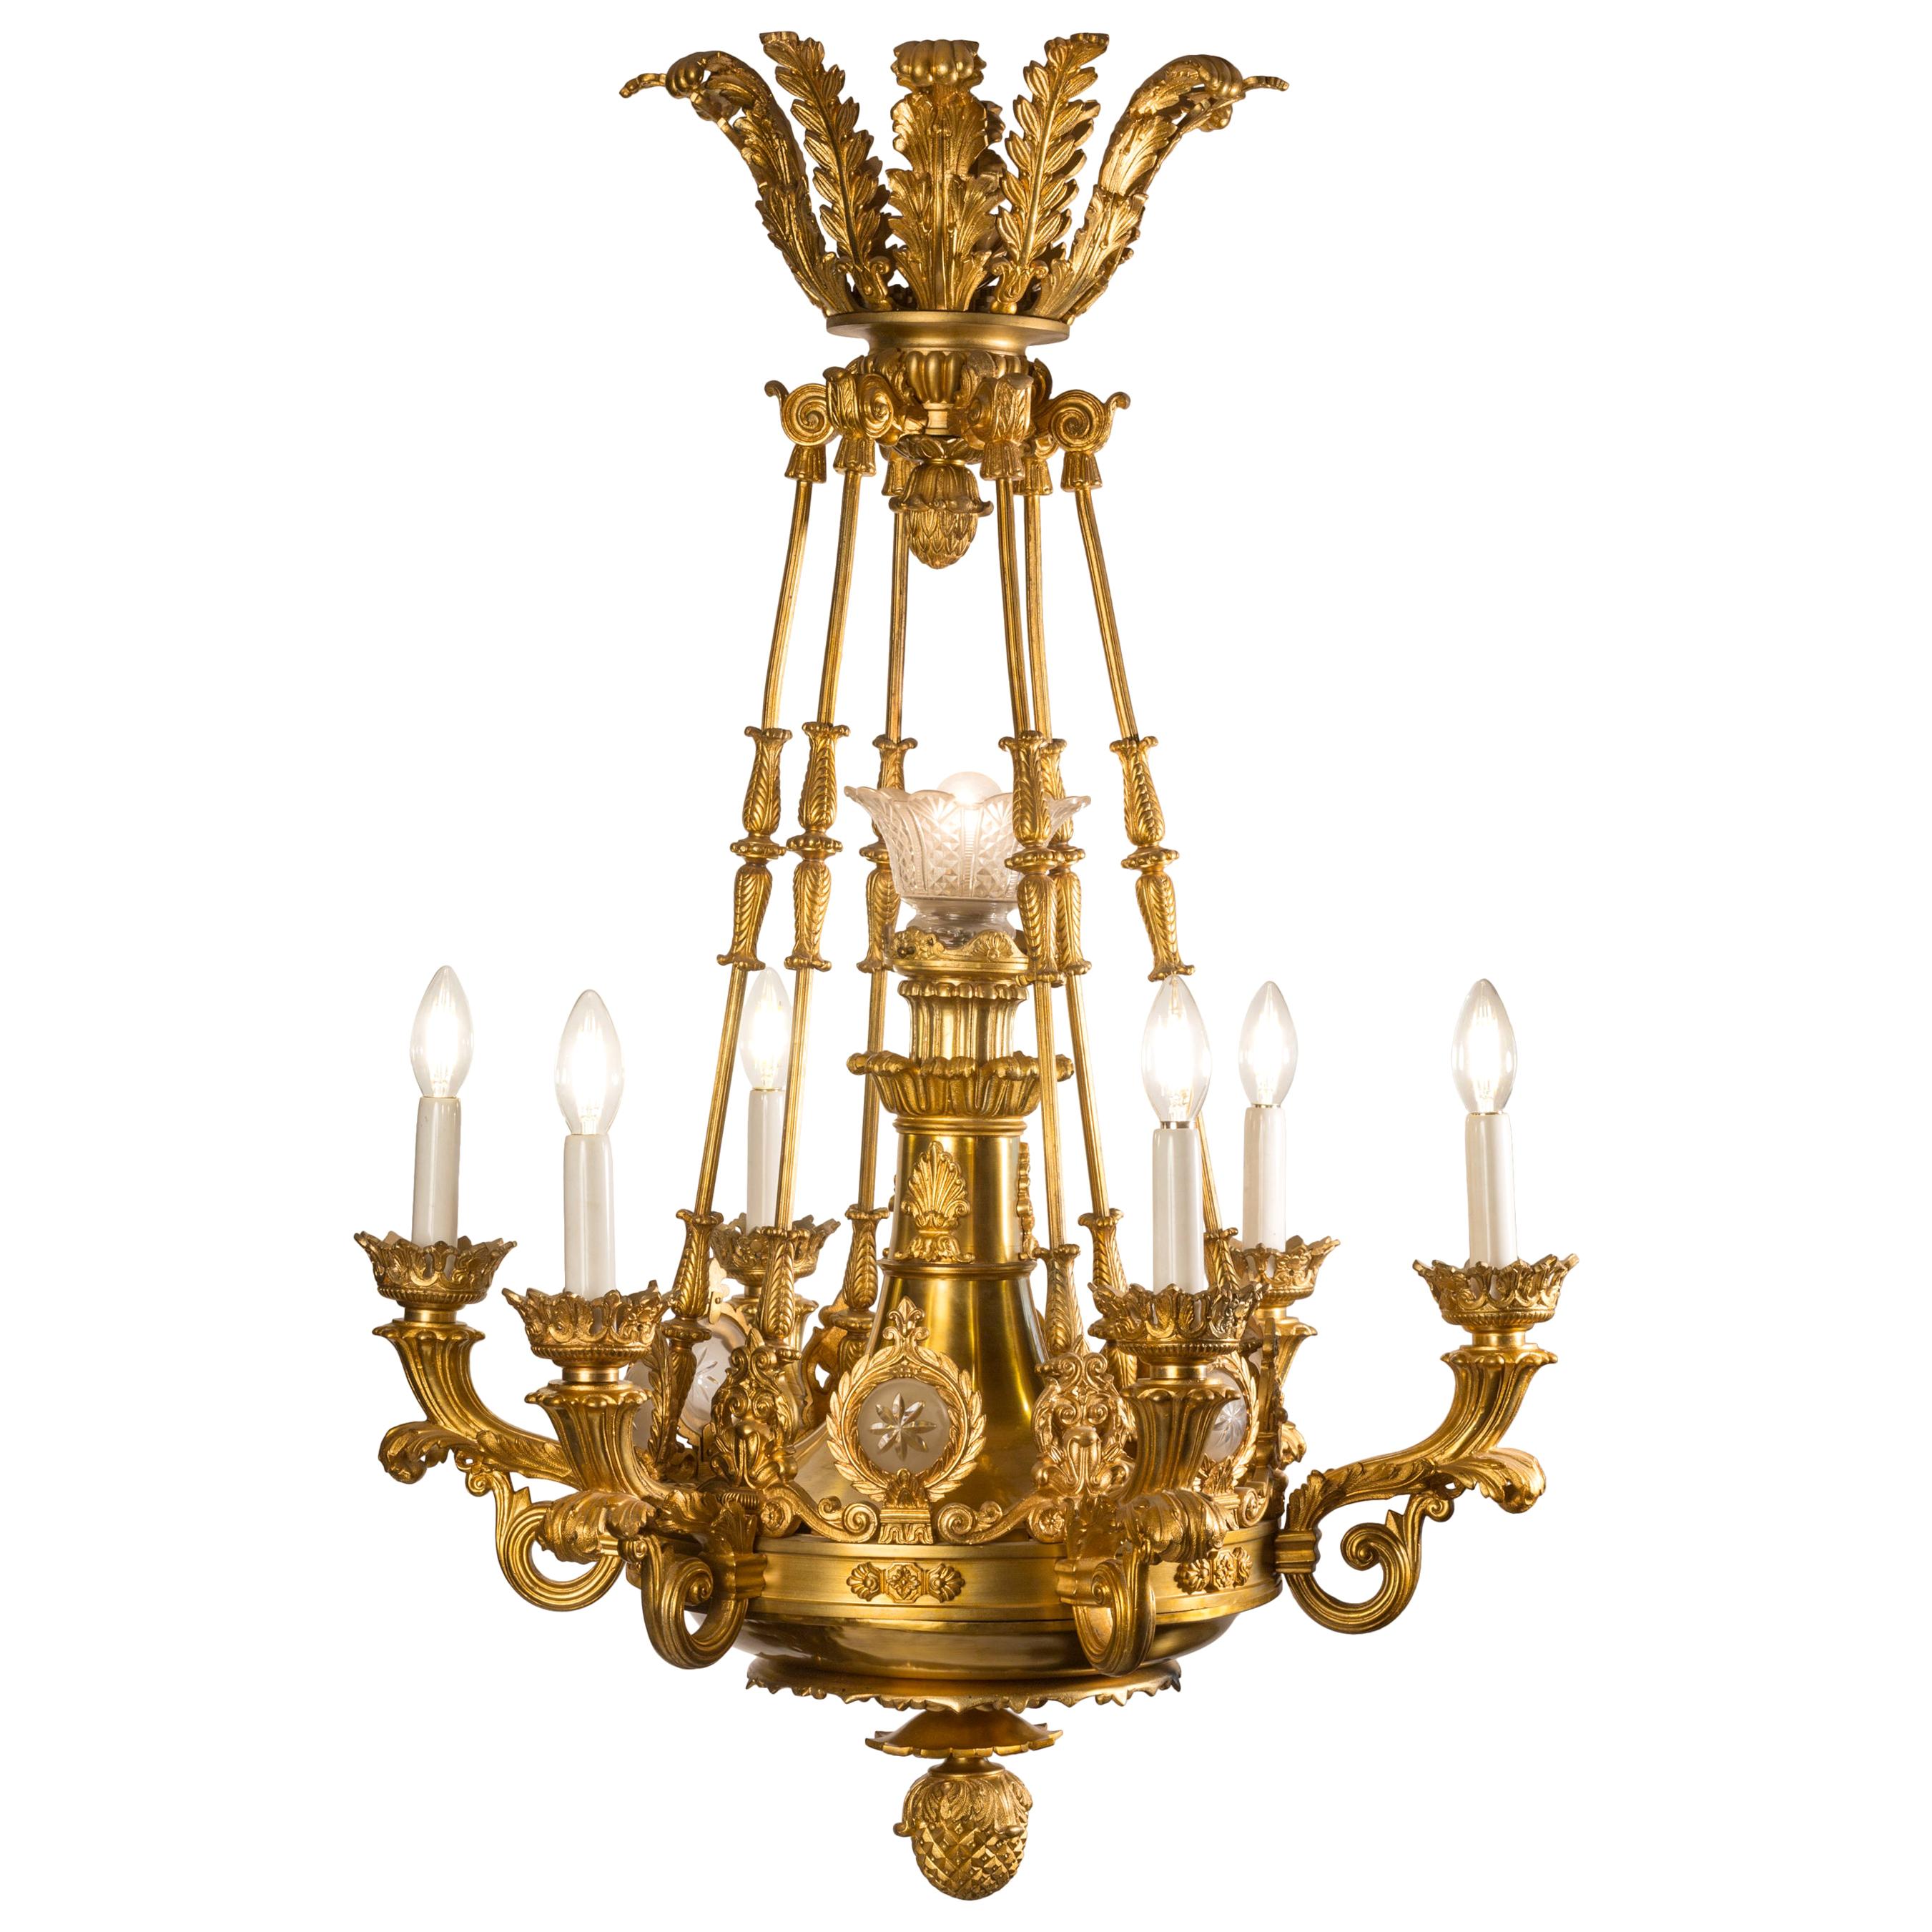 19th Century Antique French Empire Revival Style Ormolu Bronze Chandelier 